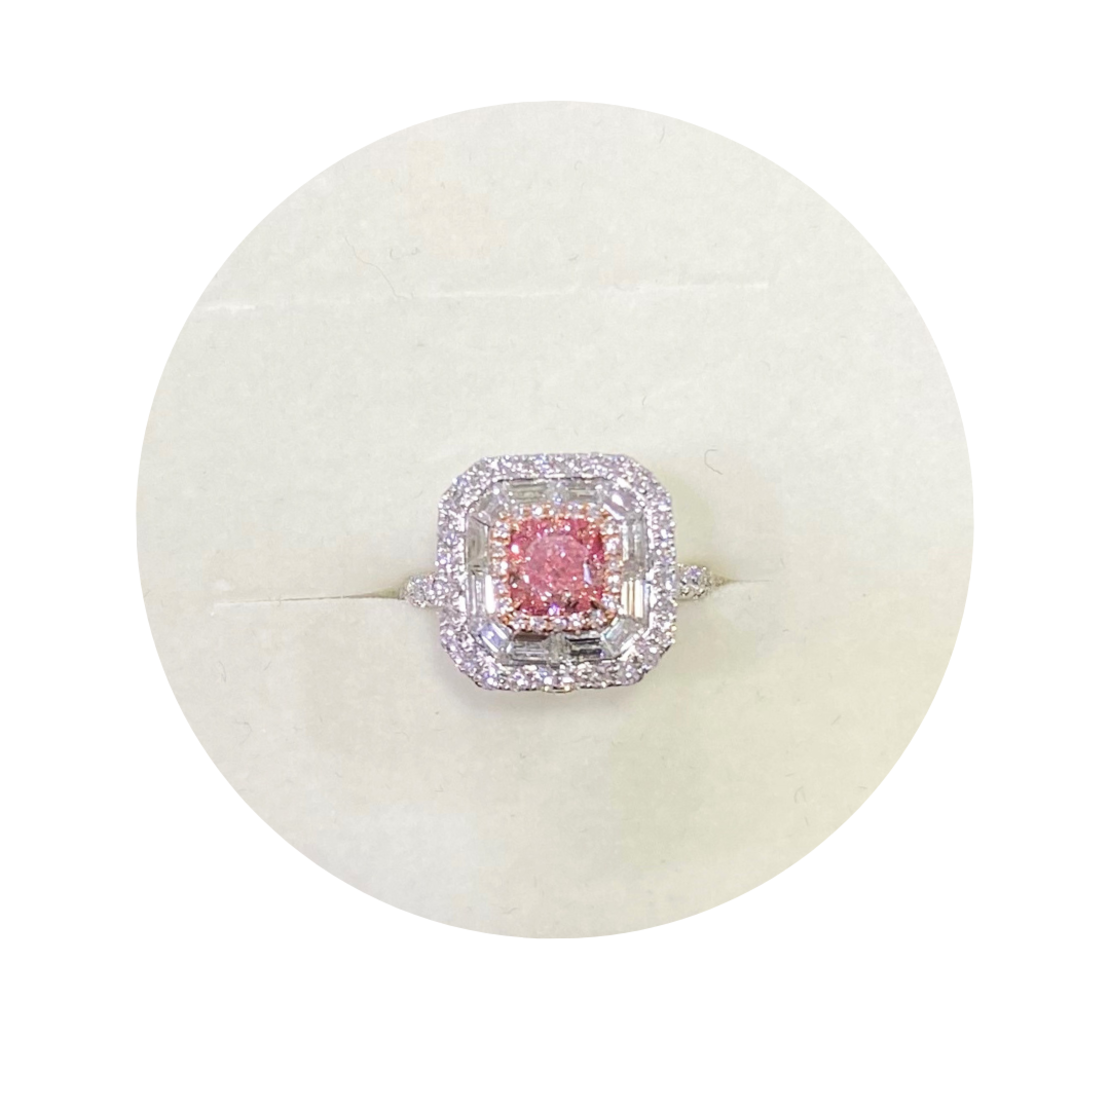 2.37 ct Pink fancy diamond ring and a necklace all in one | Алтънбаш